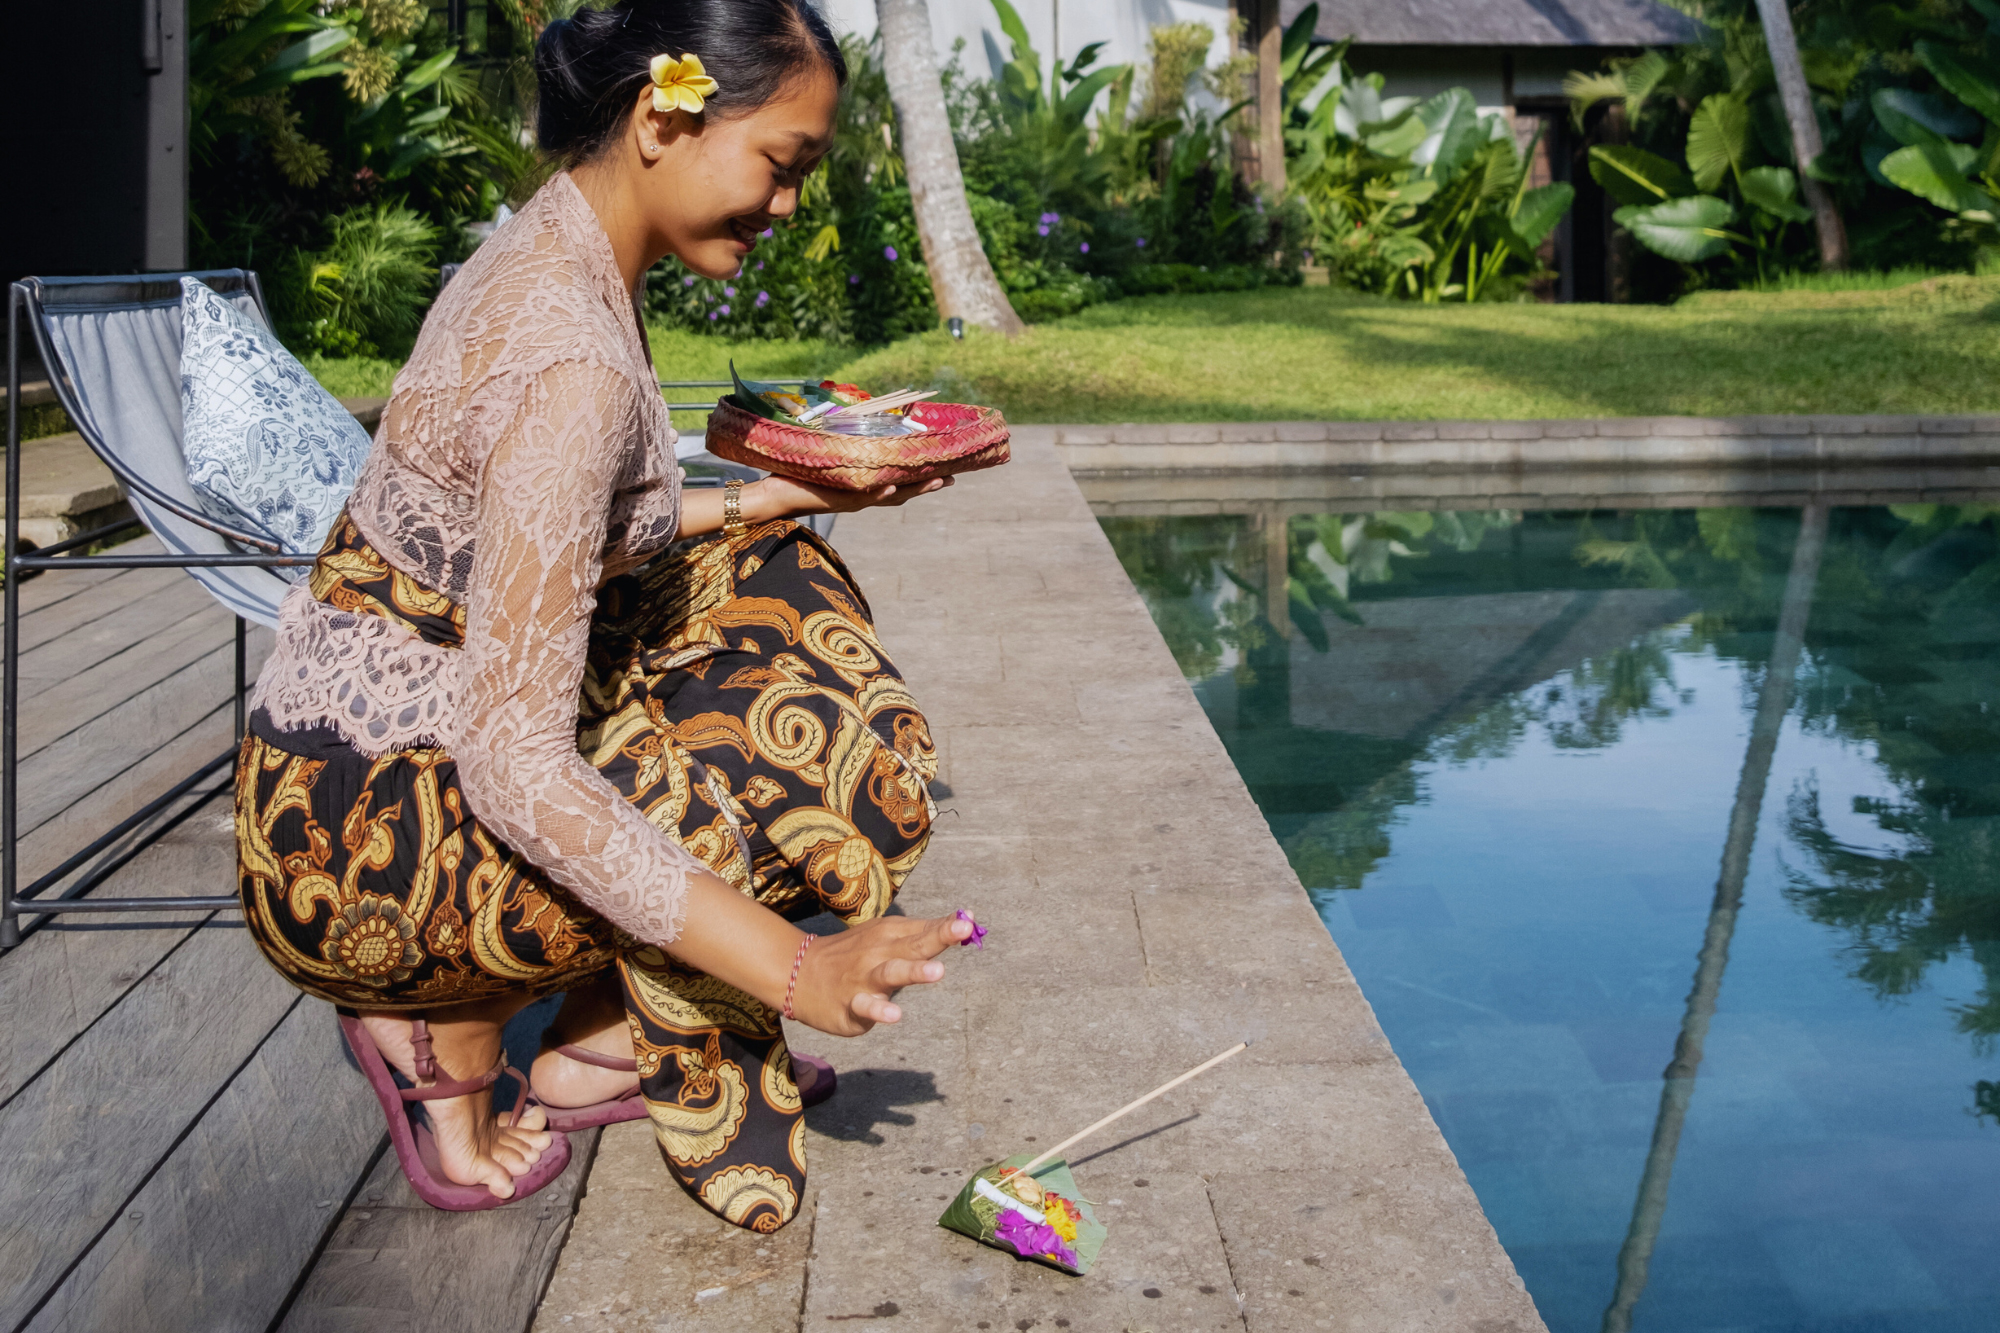 Bali’s Day of Silence and the Island’s Enduring Magic